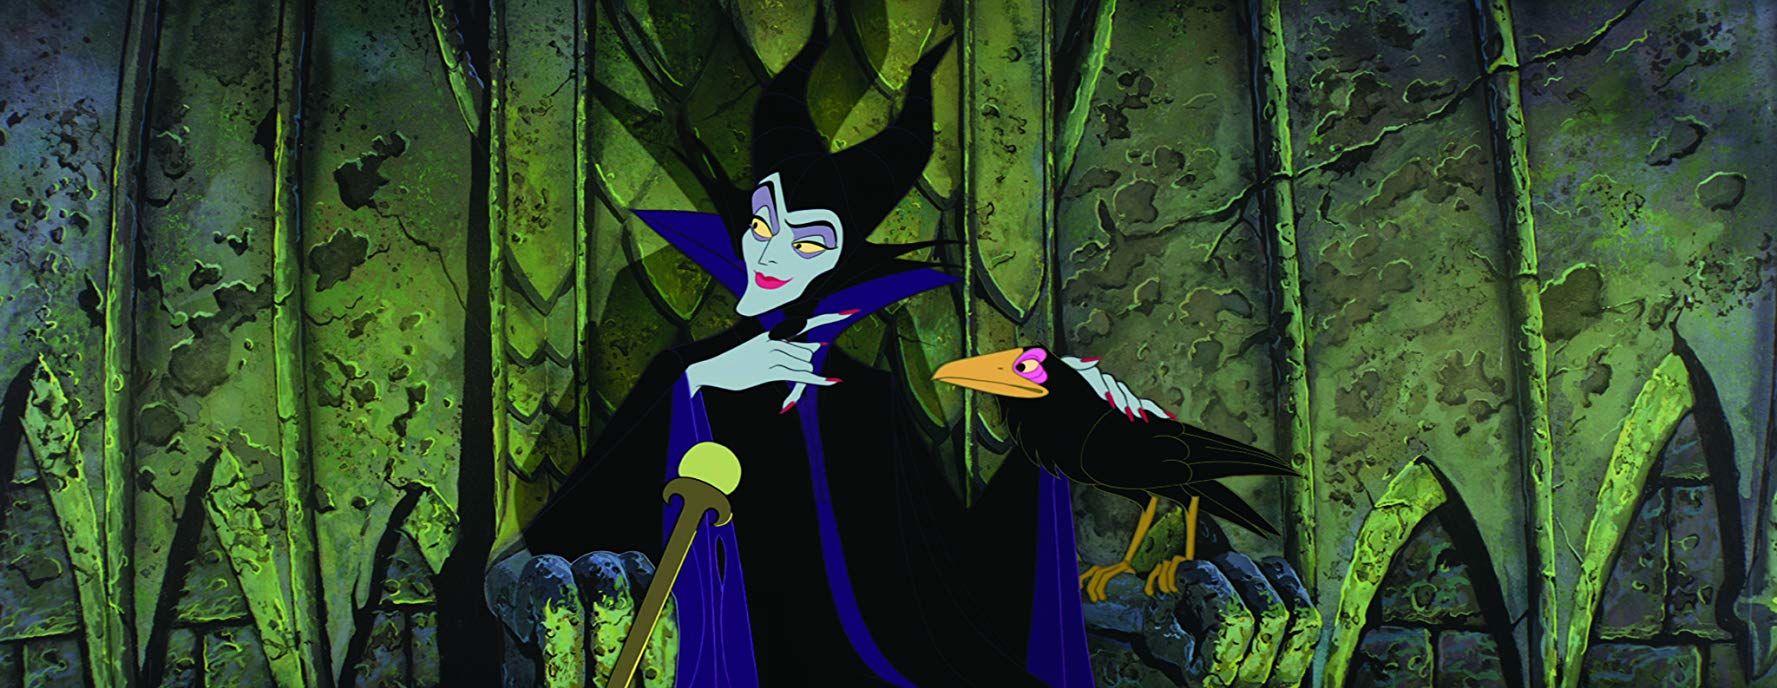 The 11 best animated movie villains | SYFY WIRE